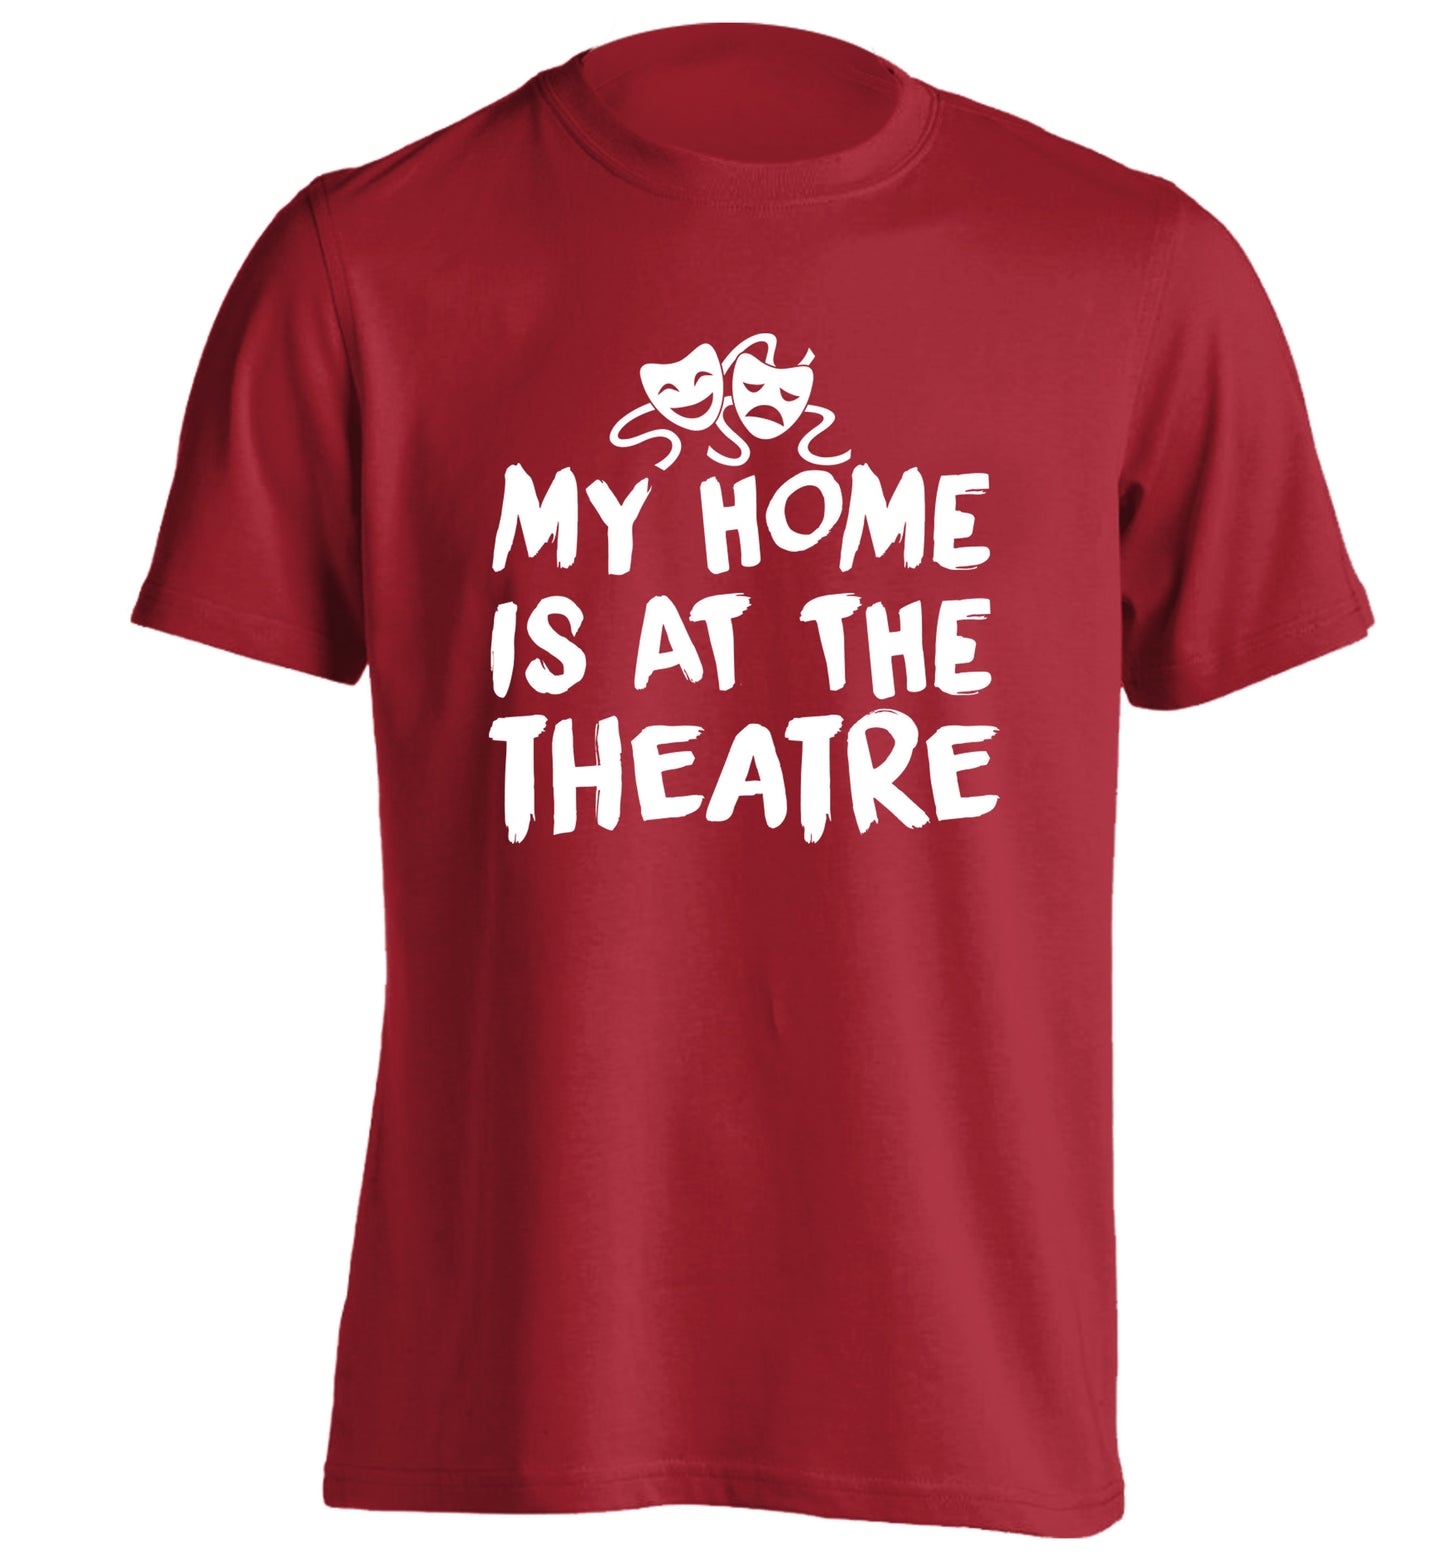 My home is at the theatre adults unisex red Tshirt 2XL